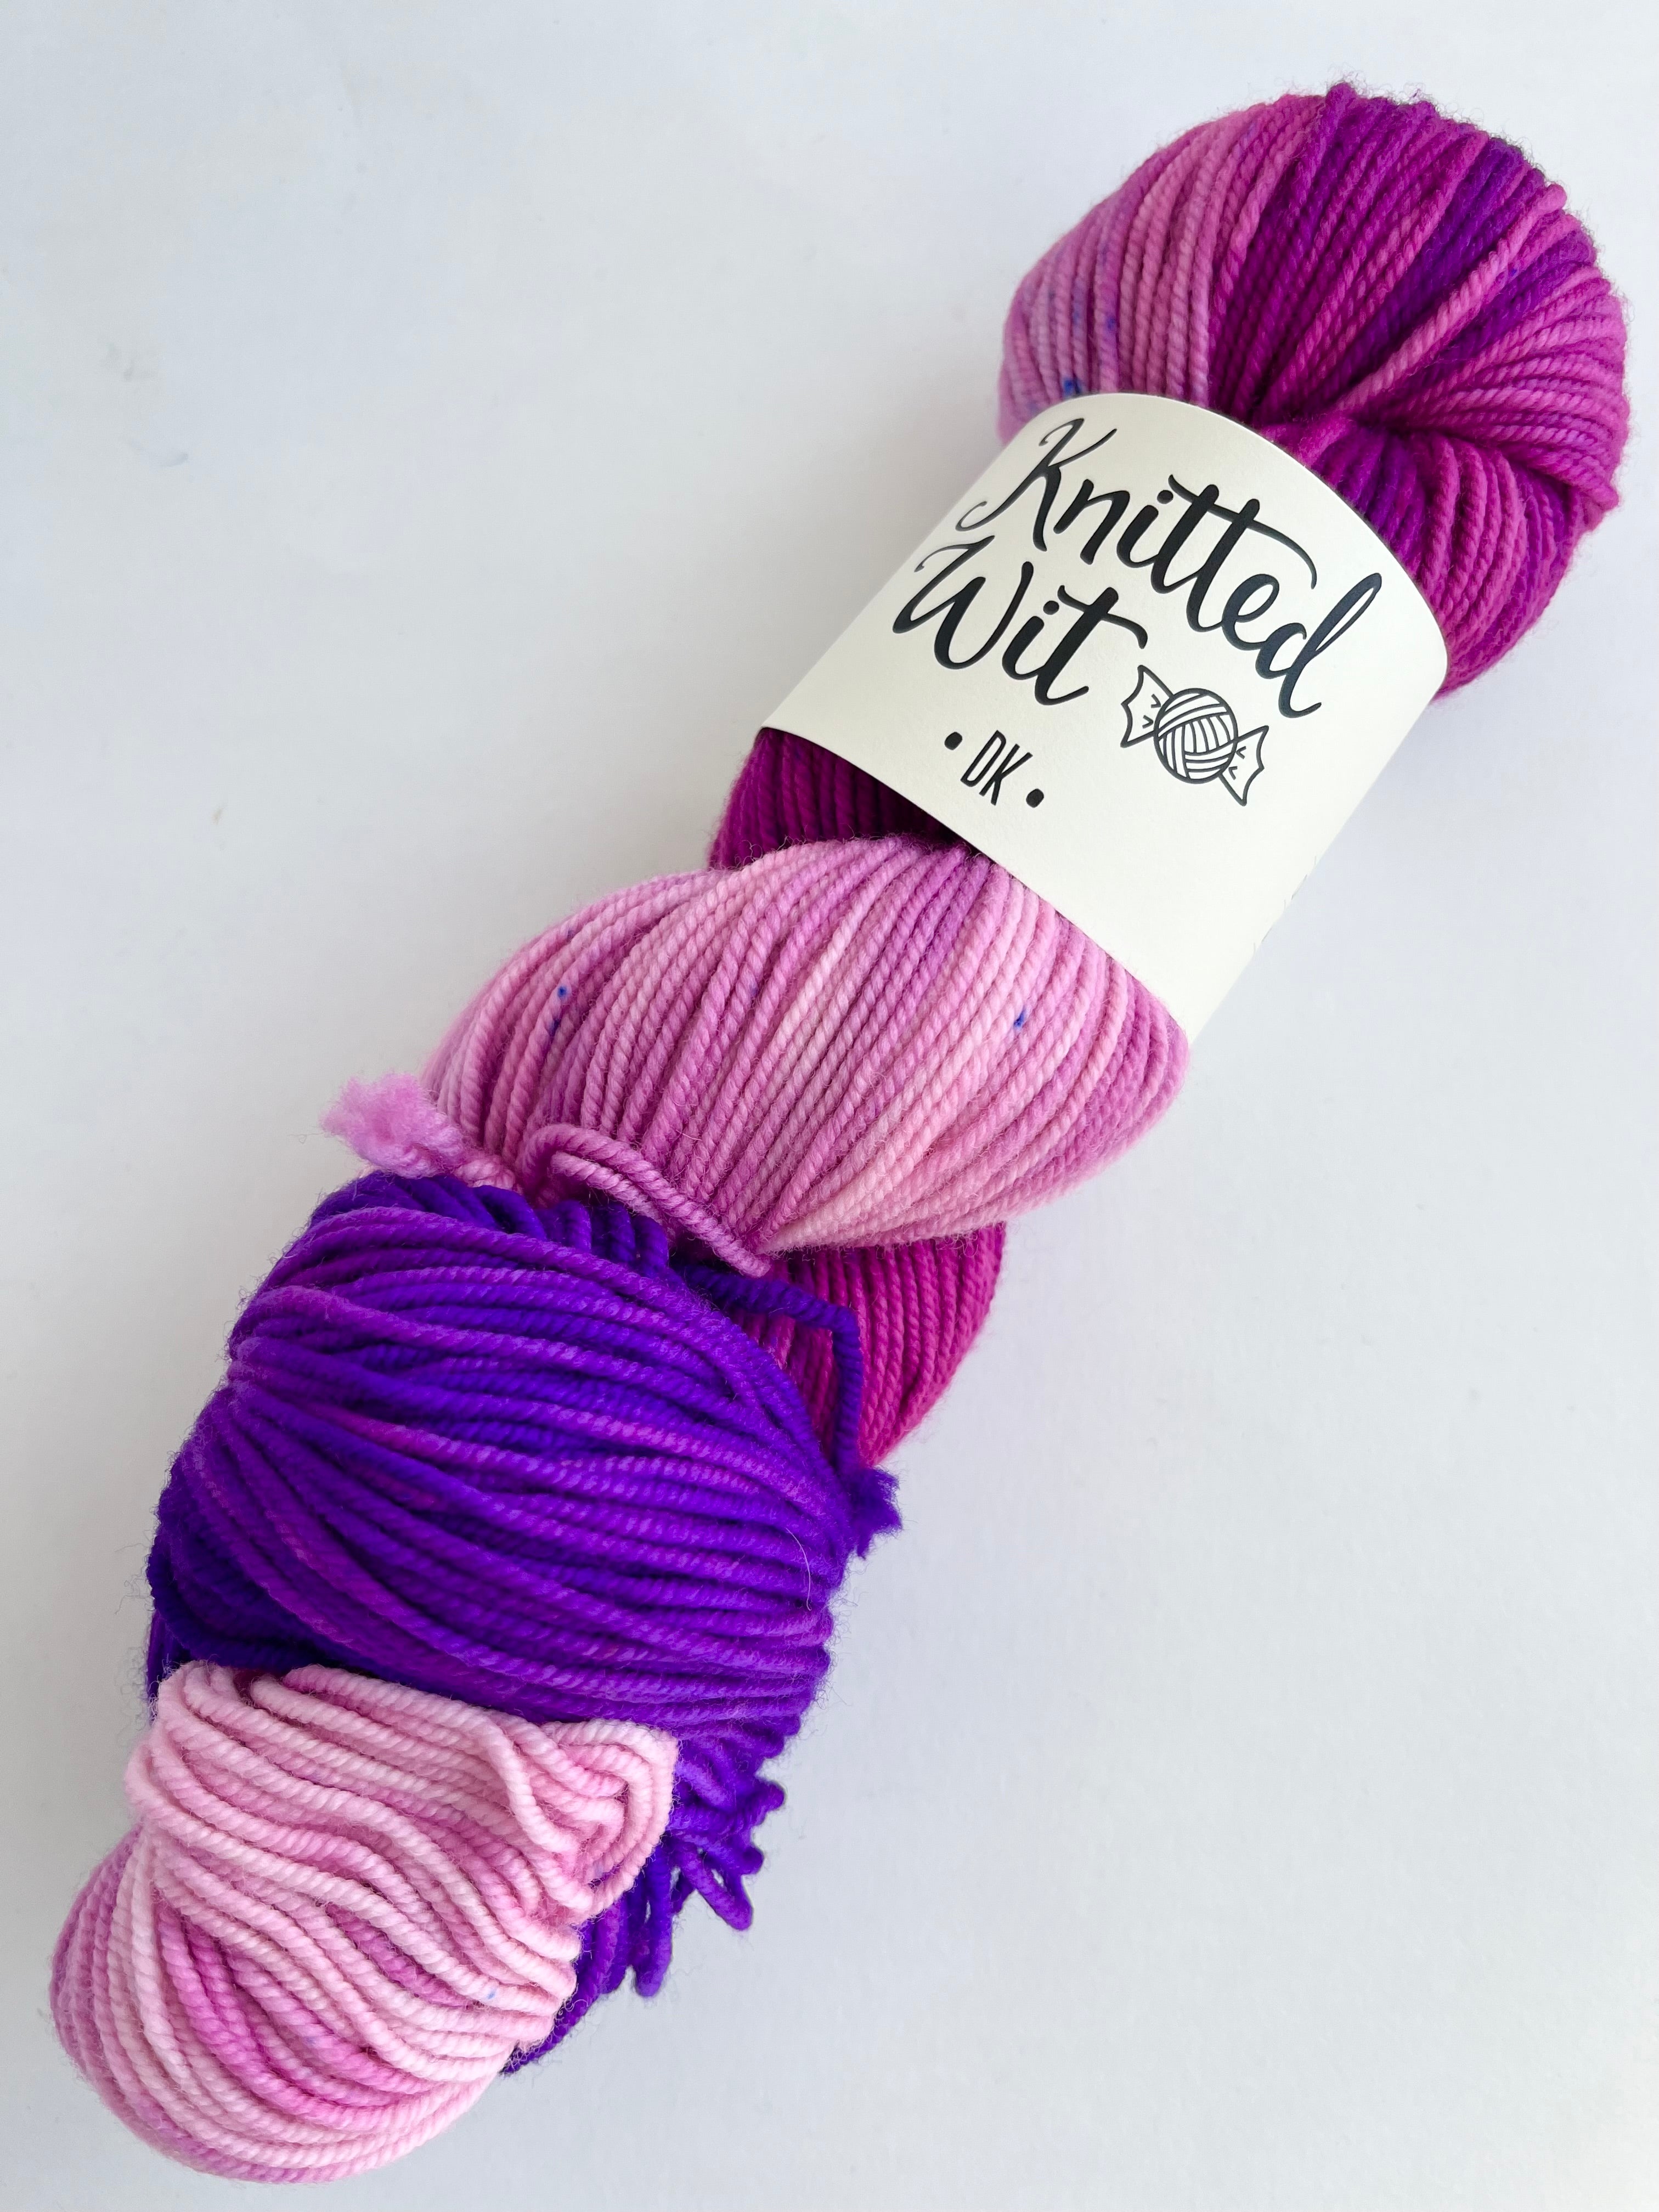 Fireweed - Knitted Wit DK